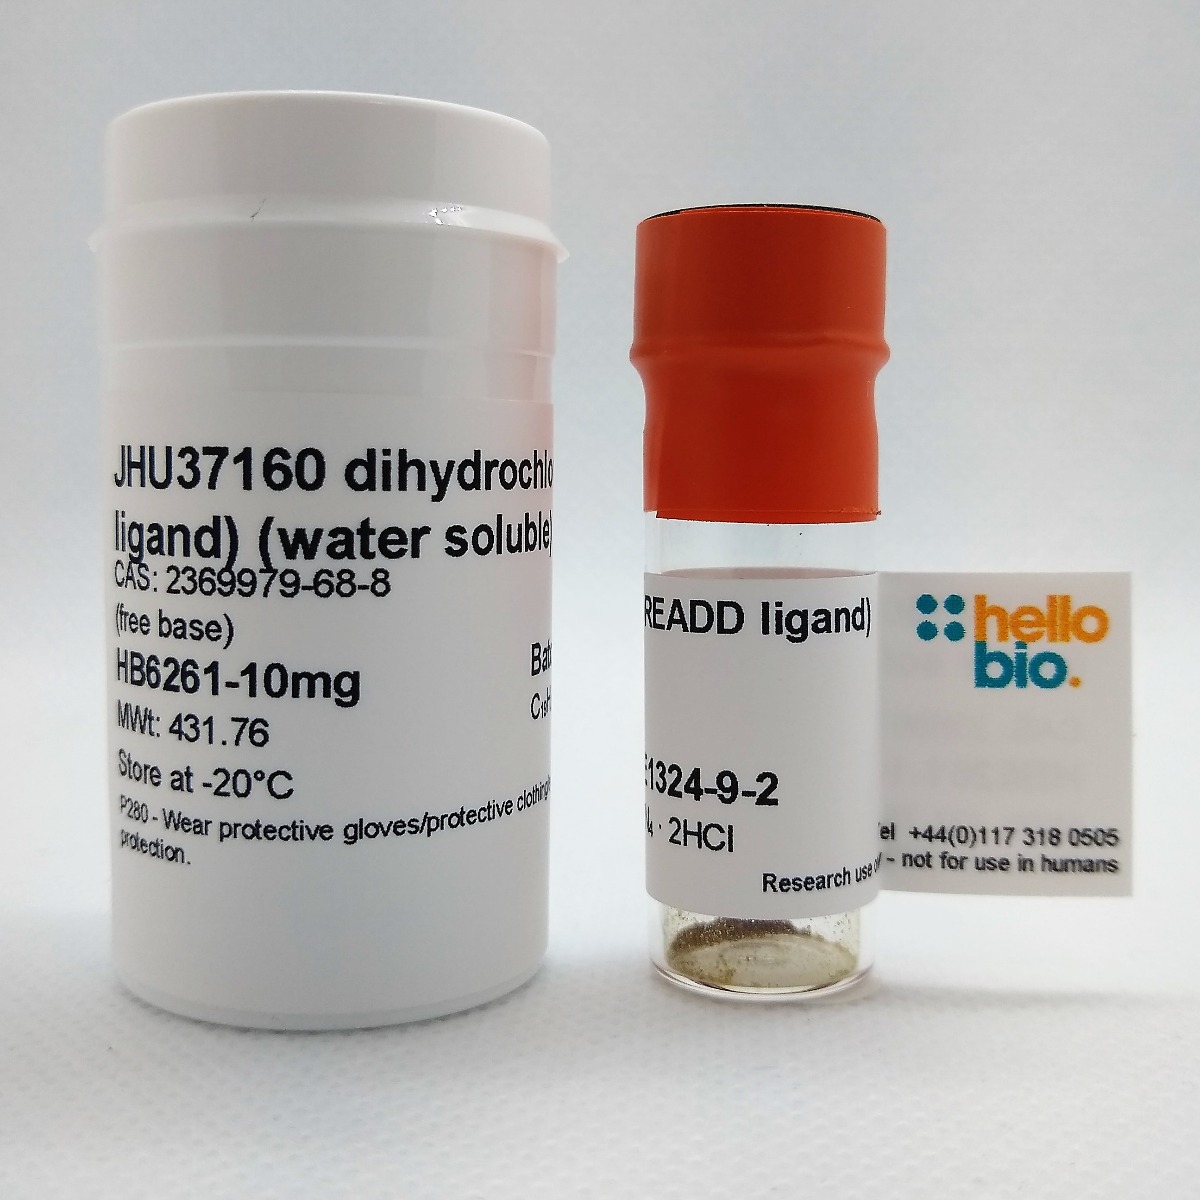 JHU37160 dihydrochloride (DREADD ligand) (water soluble) product vial image | Hello Bio